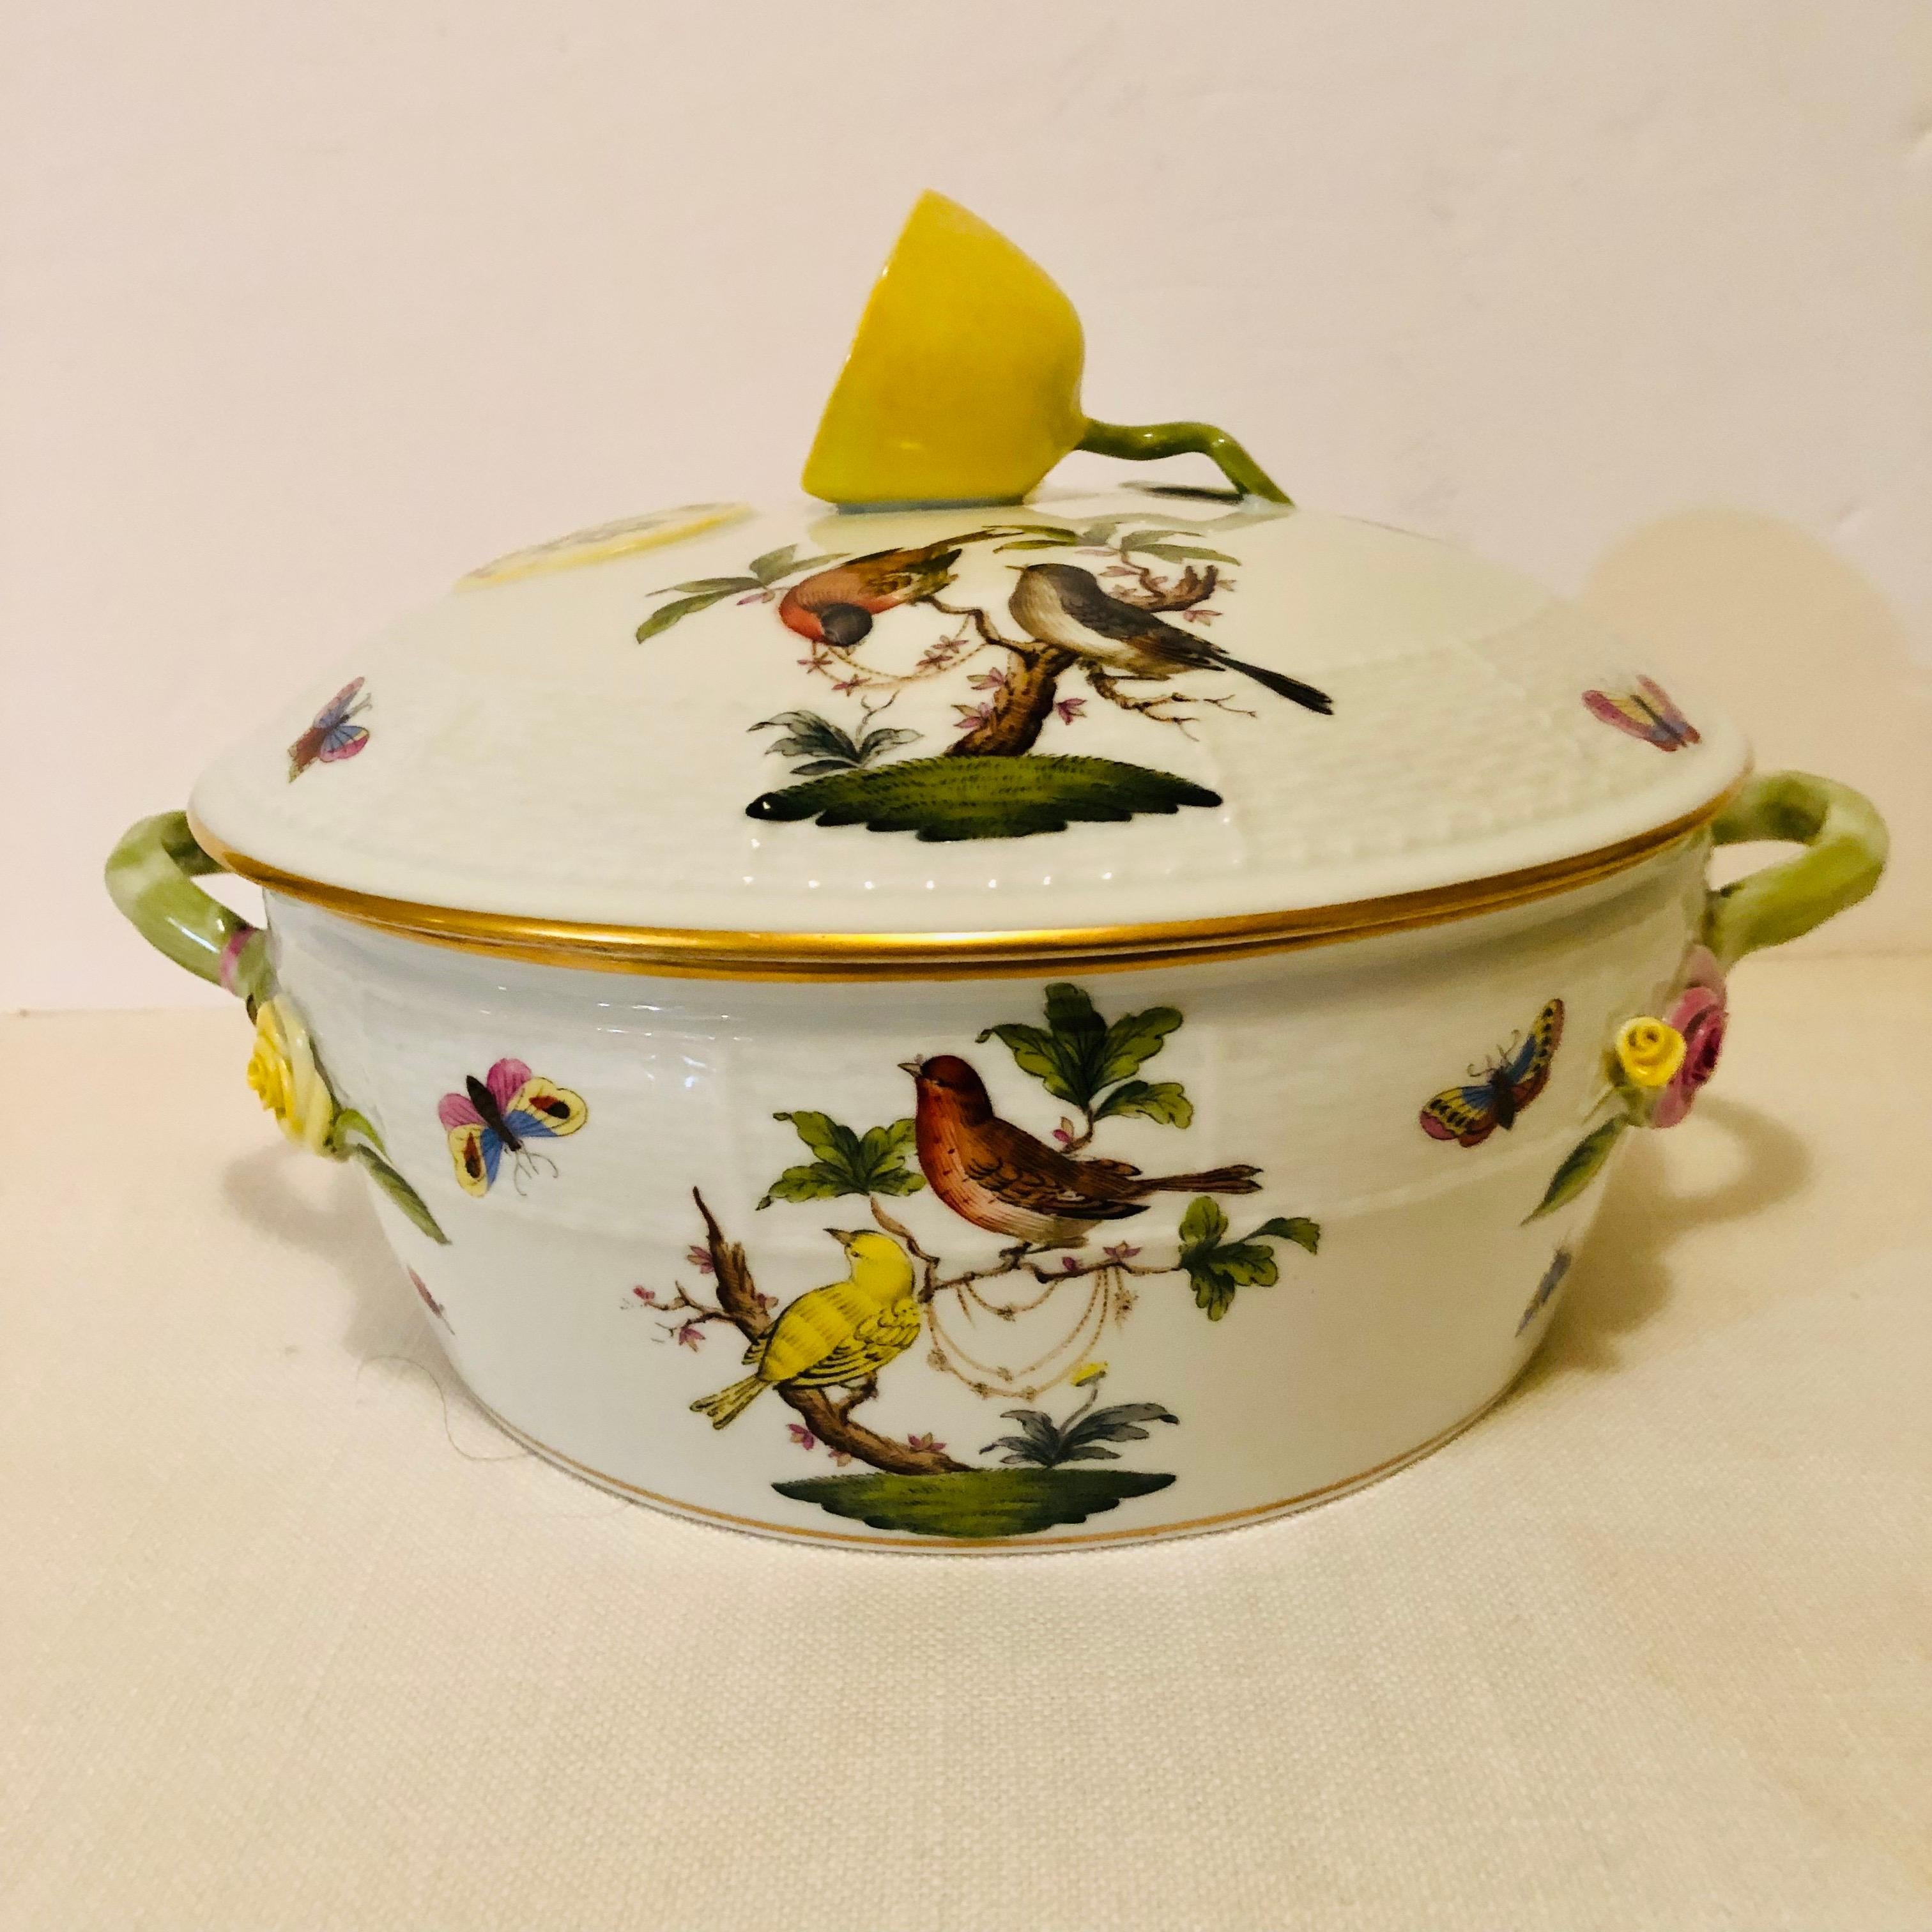 Hand Painted Herend Rothschild Bird Covered Bowl with a Raised Lemon on the Top 3